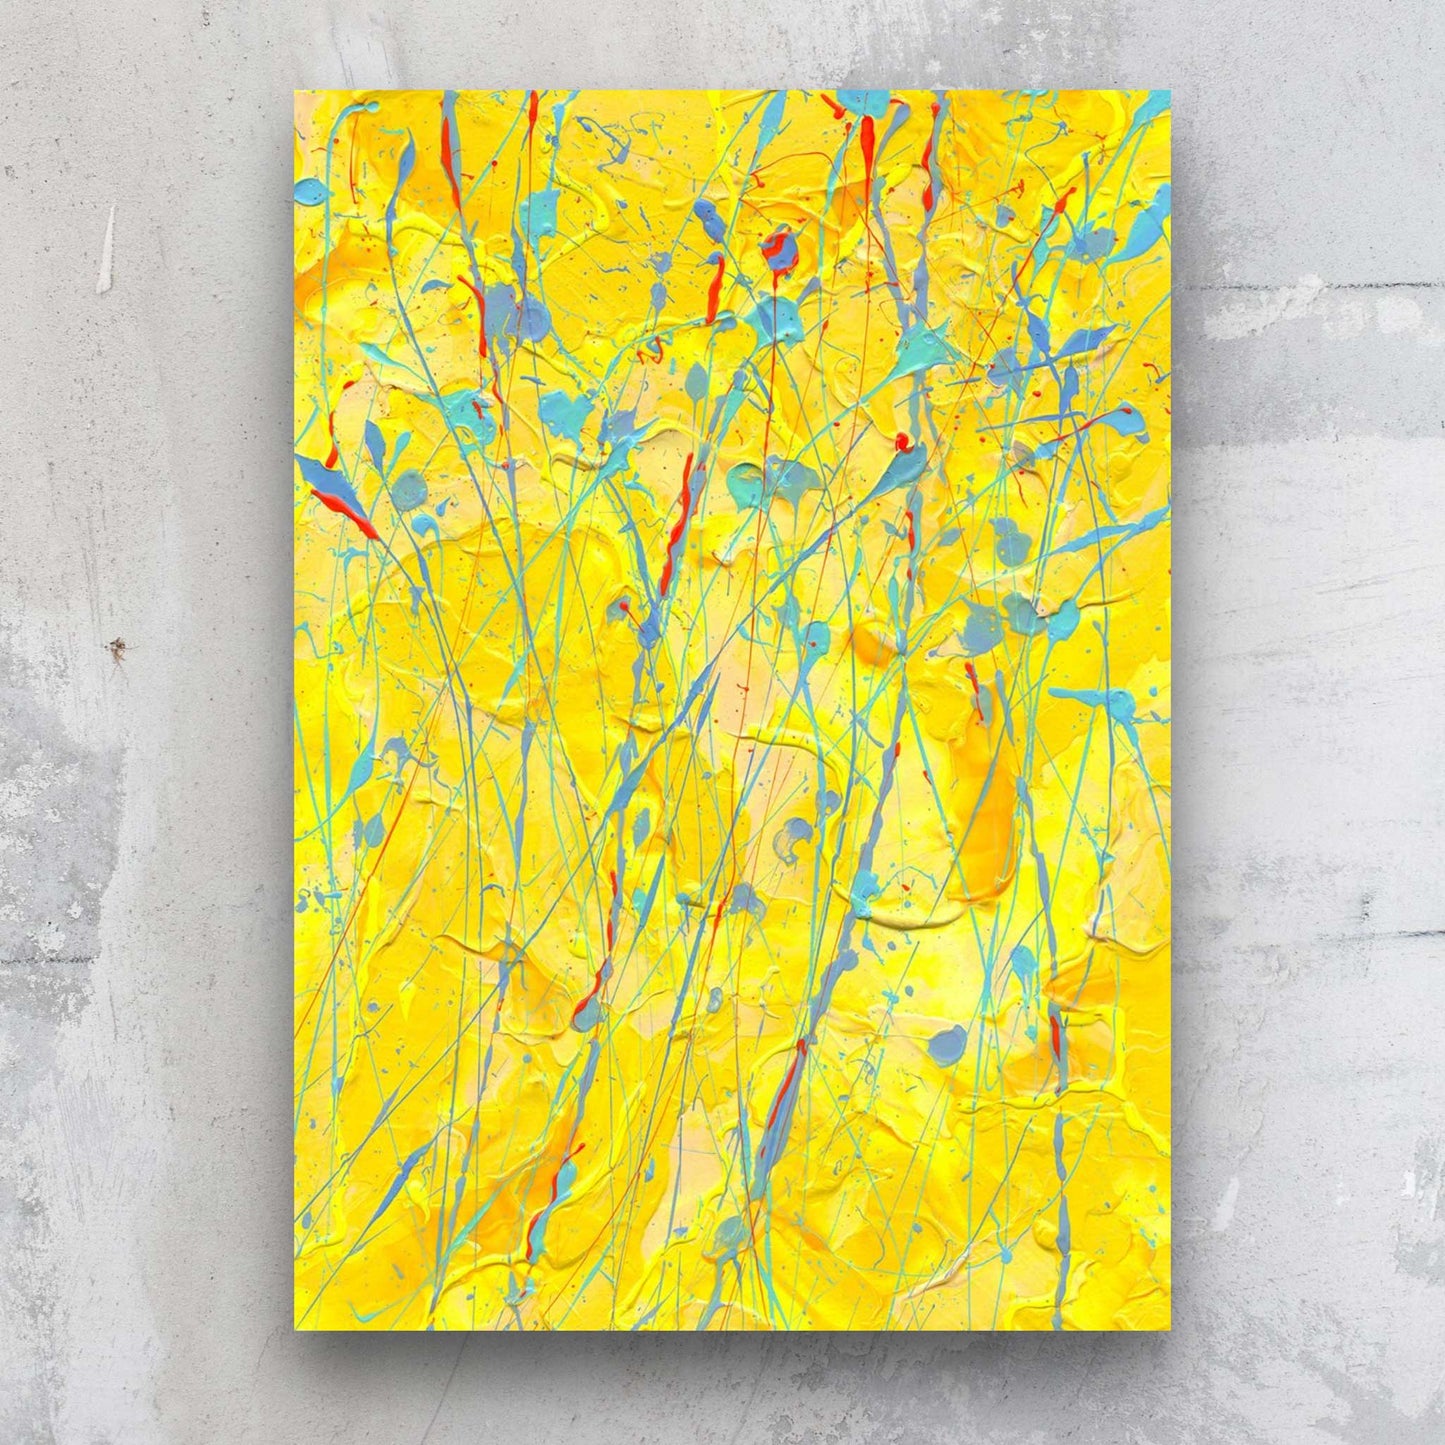 Sunflower is an original abstract painting on paper in rich yellows, orange and blue by Bridget Bradley, Abstract Expressionist Artist. Discover more